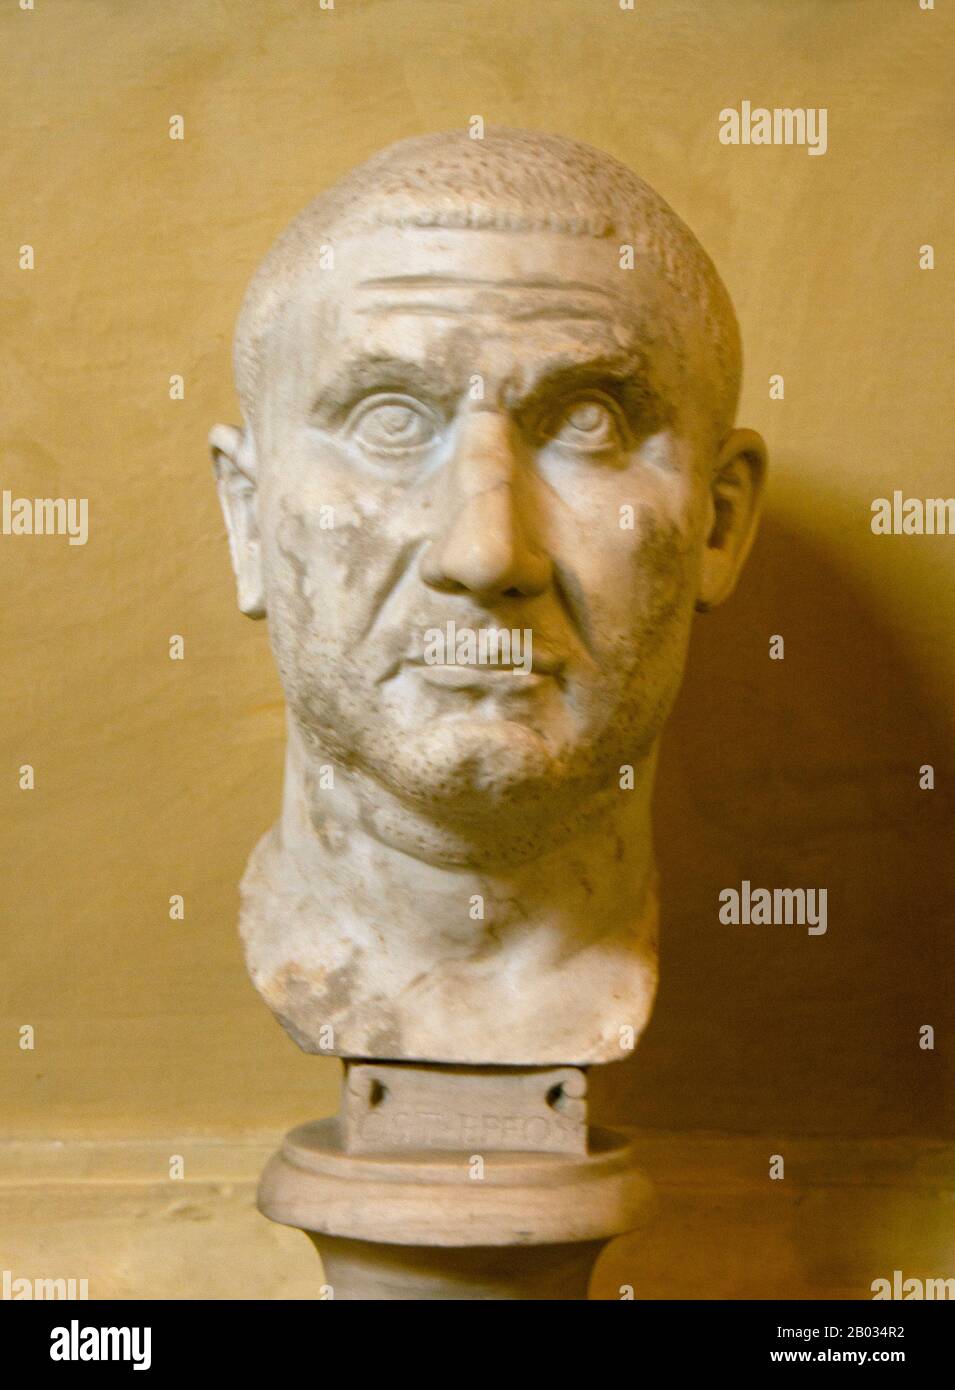 Licinius I (Latin: Gaius Valerius Licinianus Licinius Augustus; c. 263–325) was a Roman emperor from 308 to 324. For most of his reign he was the colleague and rival of Constantine I, with whom he co-authored the Edict of Milan that granted official toleration to Christians in the Roman Empire. He was finally defeated at the Battle of Chrysopolis, before being executed on the orders of Constantine I. Stock Photo